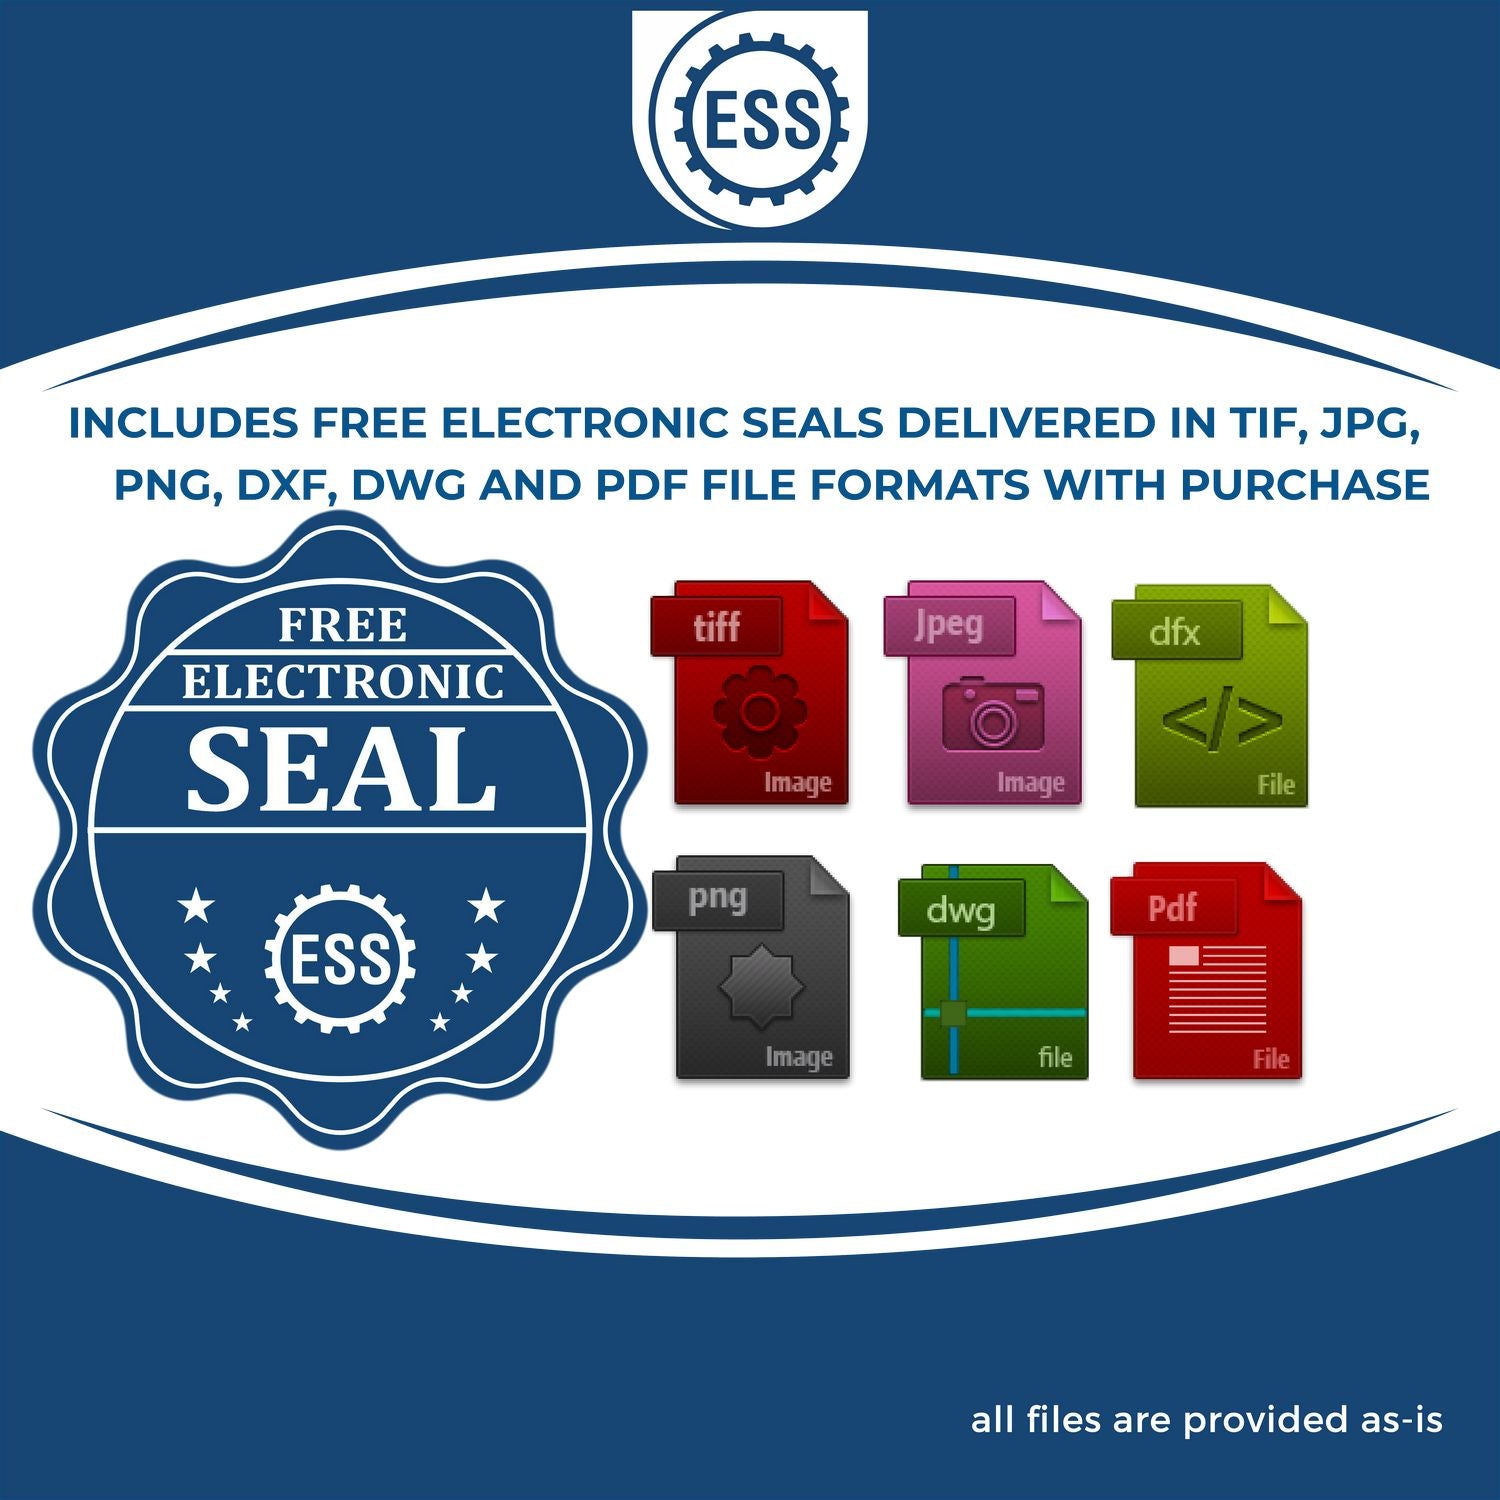 An infographic for the free electronic seal for the Self-Inking Idaho Landscape Architect Stamp illustrating the different file type icons such as DXF, DWG, TIF, JPG and PNG.